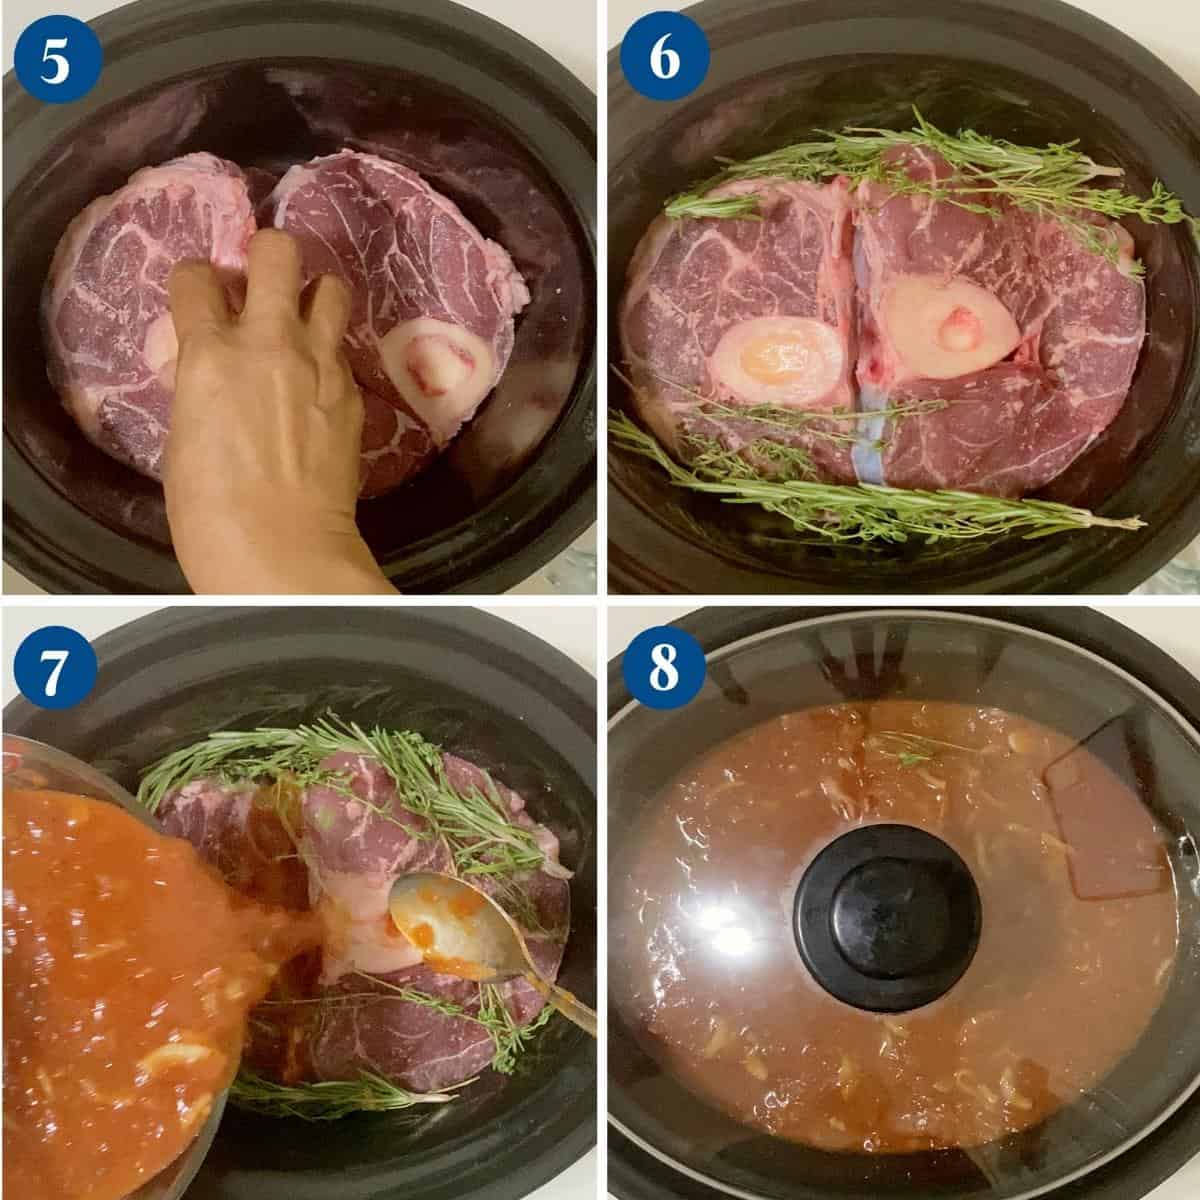 Progress pictures making veal shanks in the slow cooker.